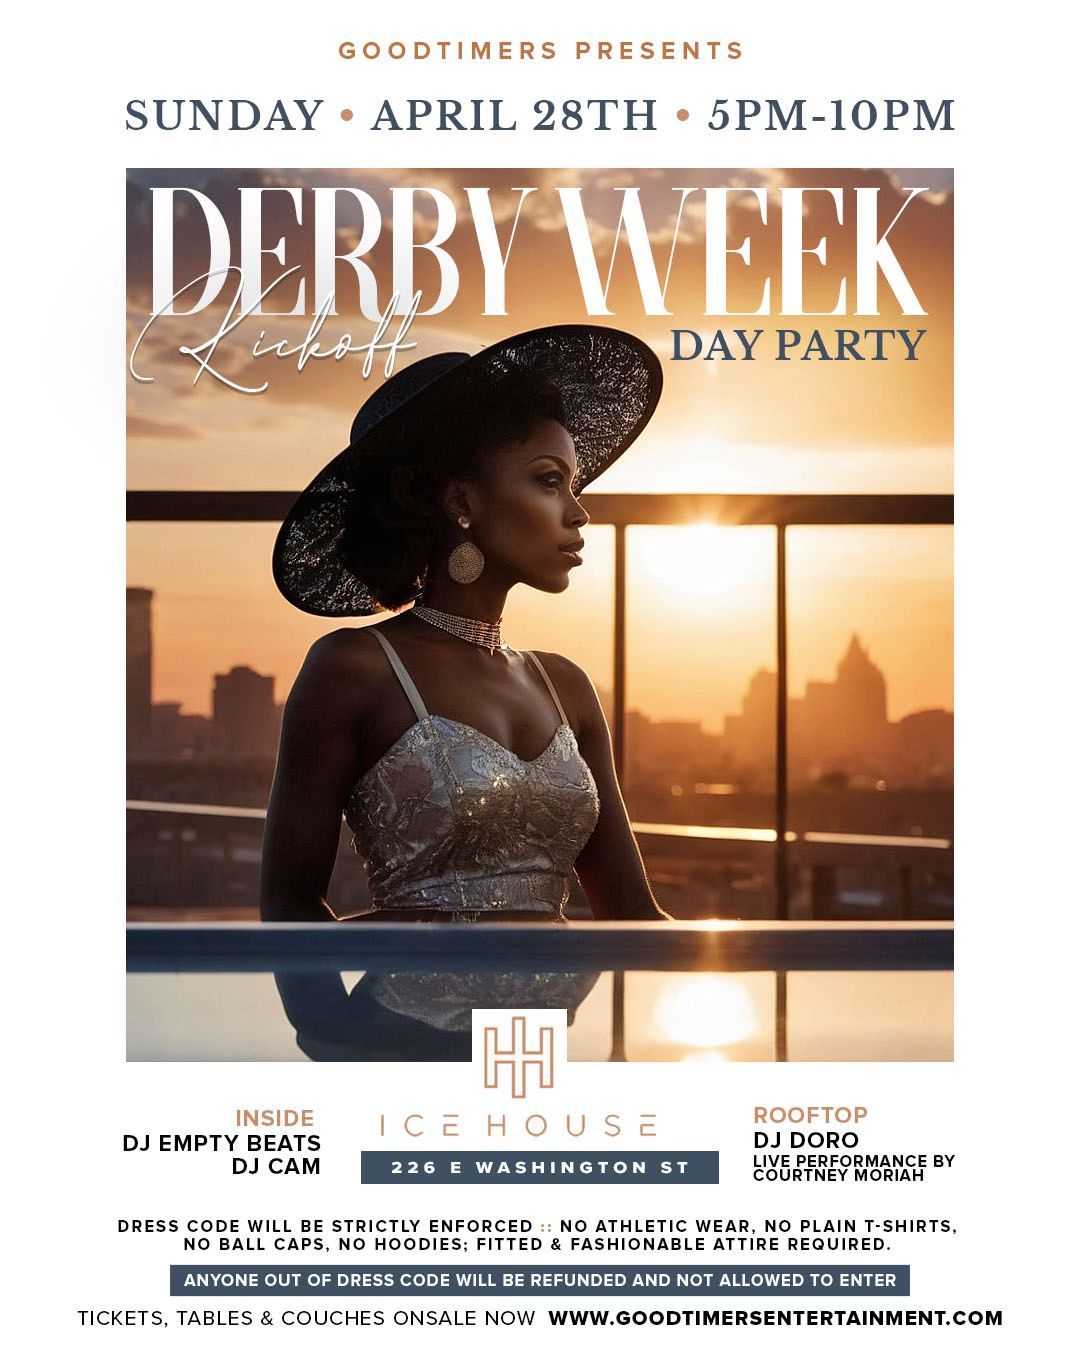 Goodtimers Derby Week Kickoff Dayparty 